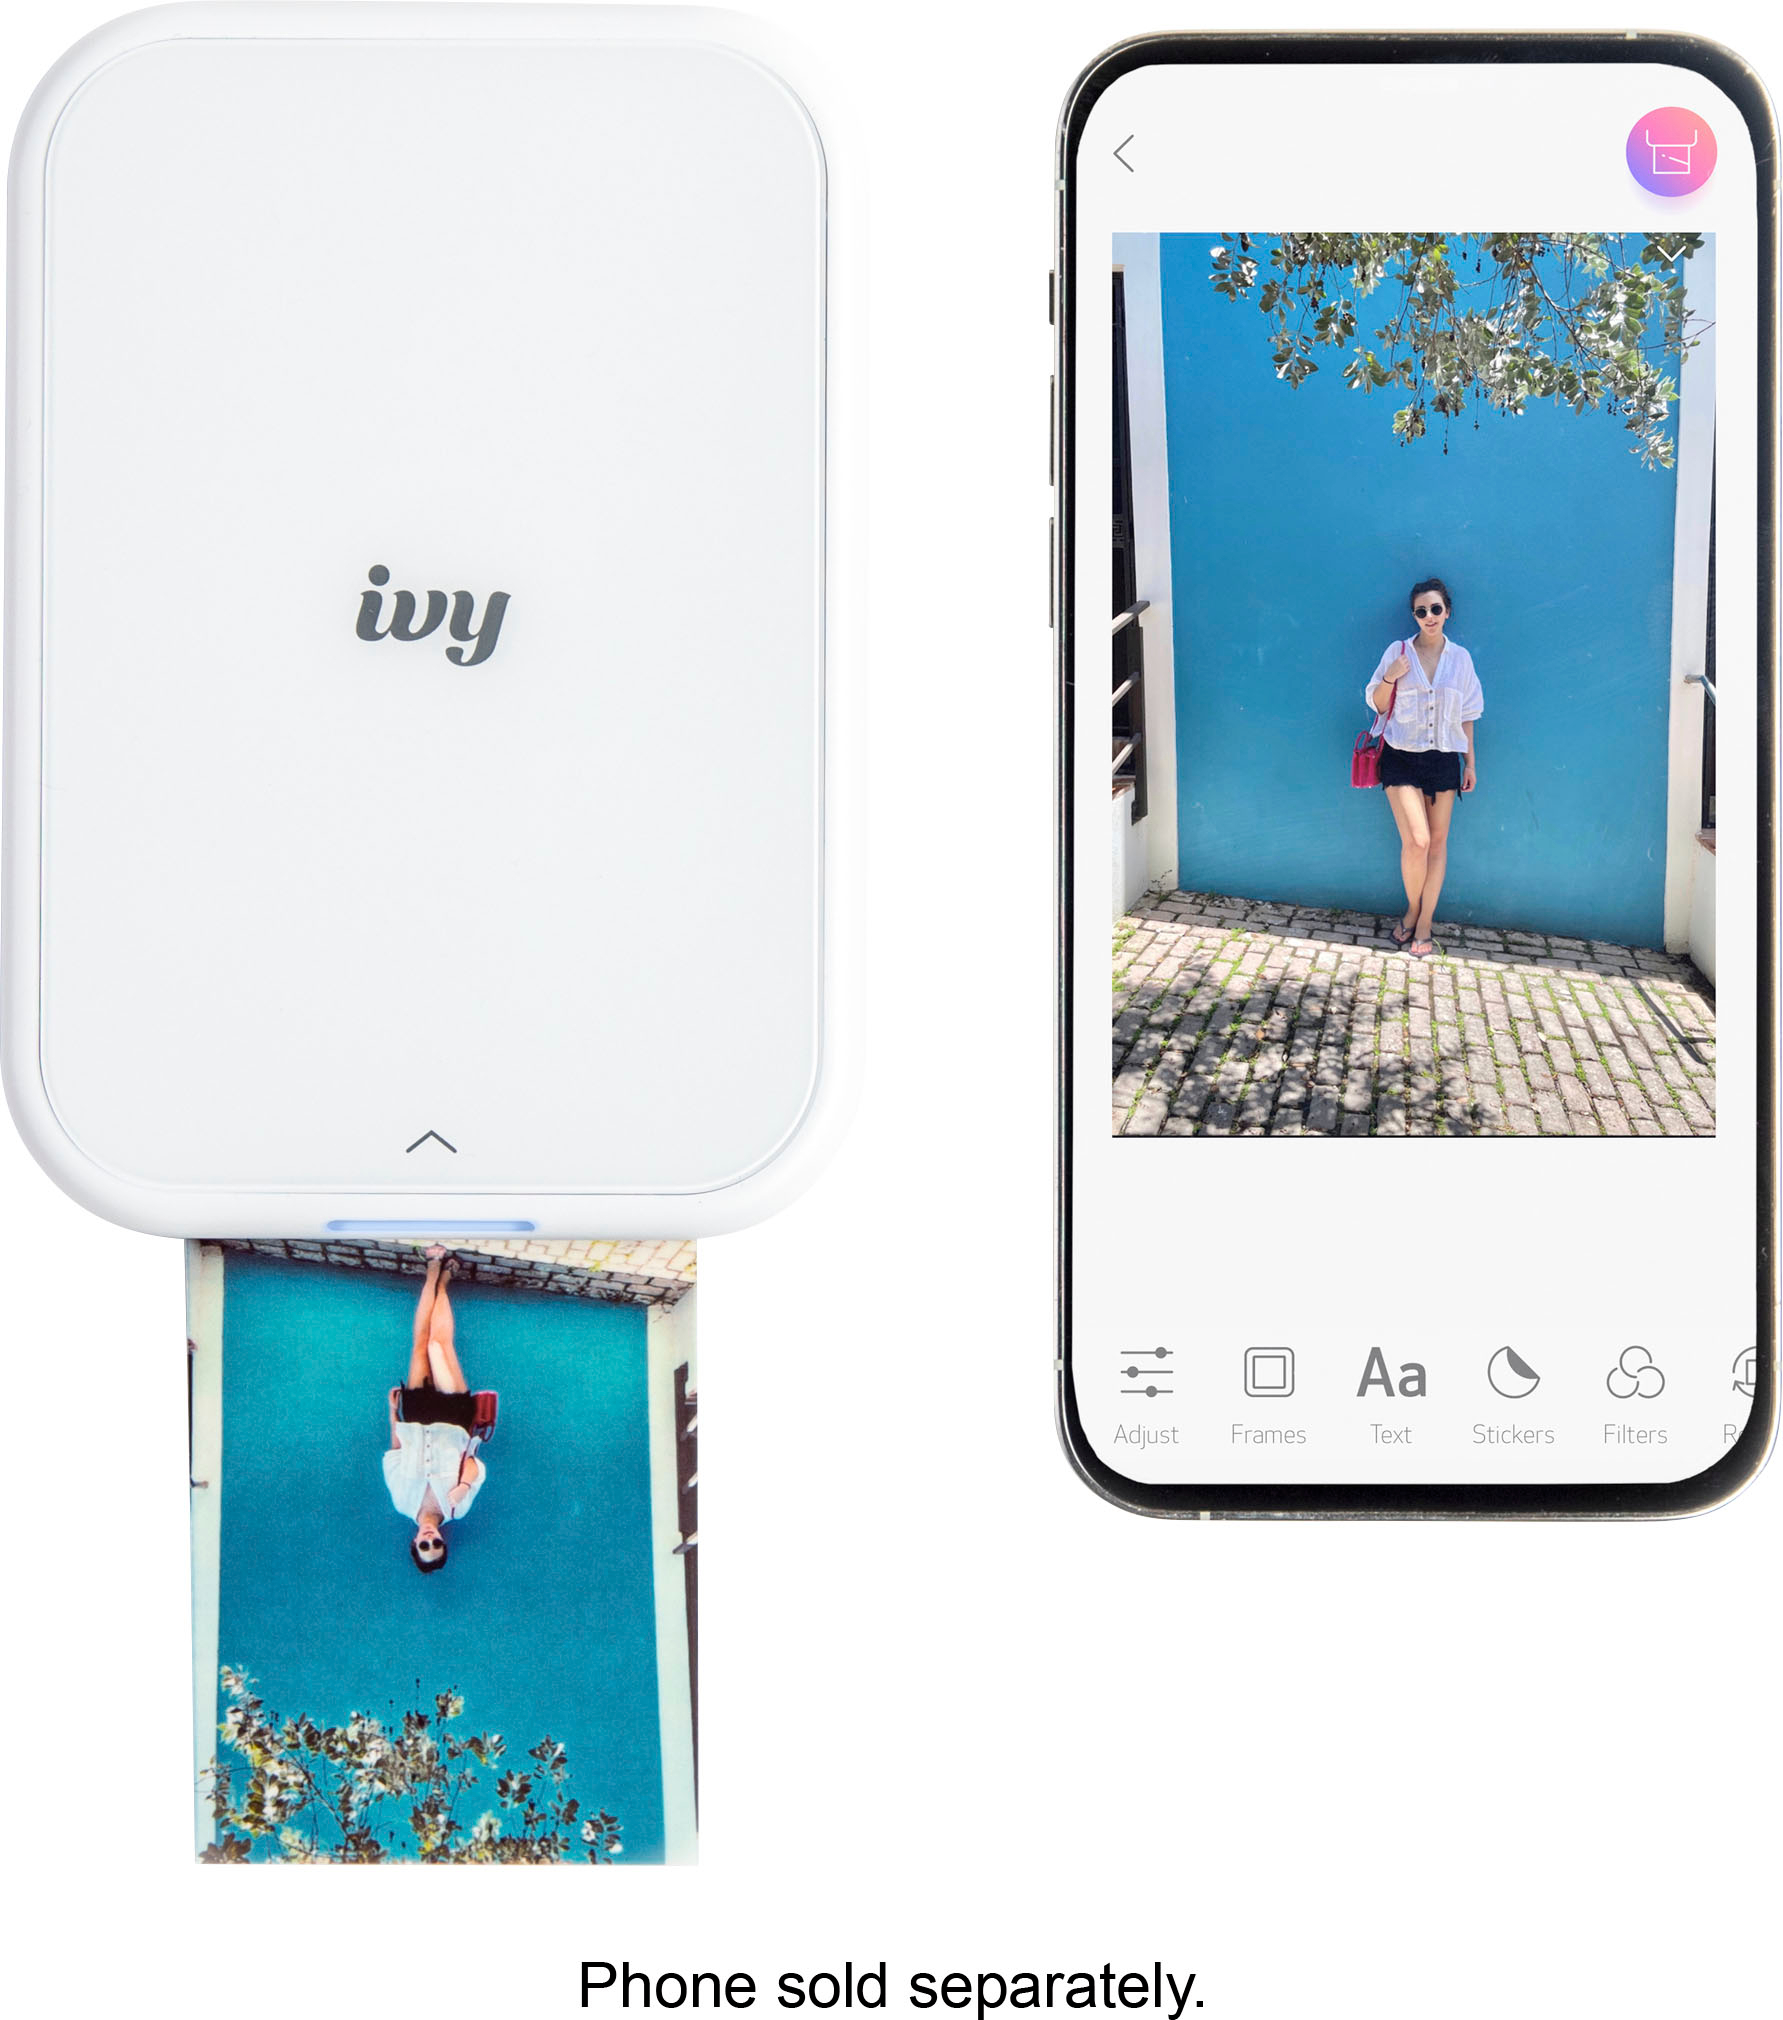 Canon's IVY mini photo printer is designed for the smartphone generation